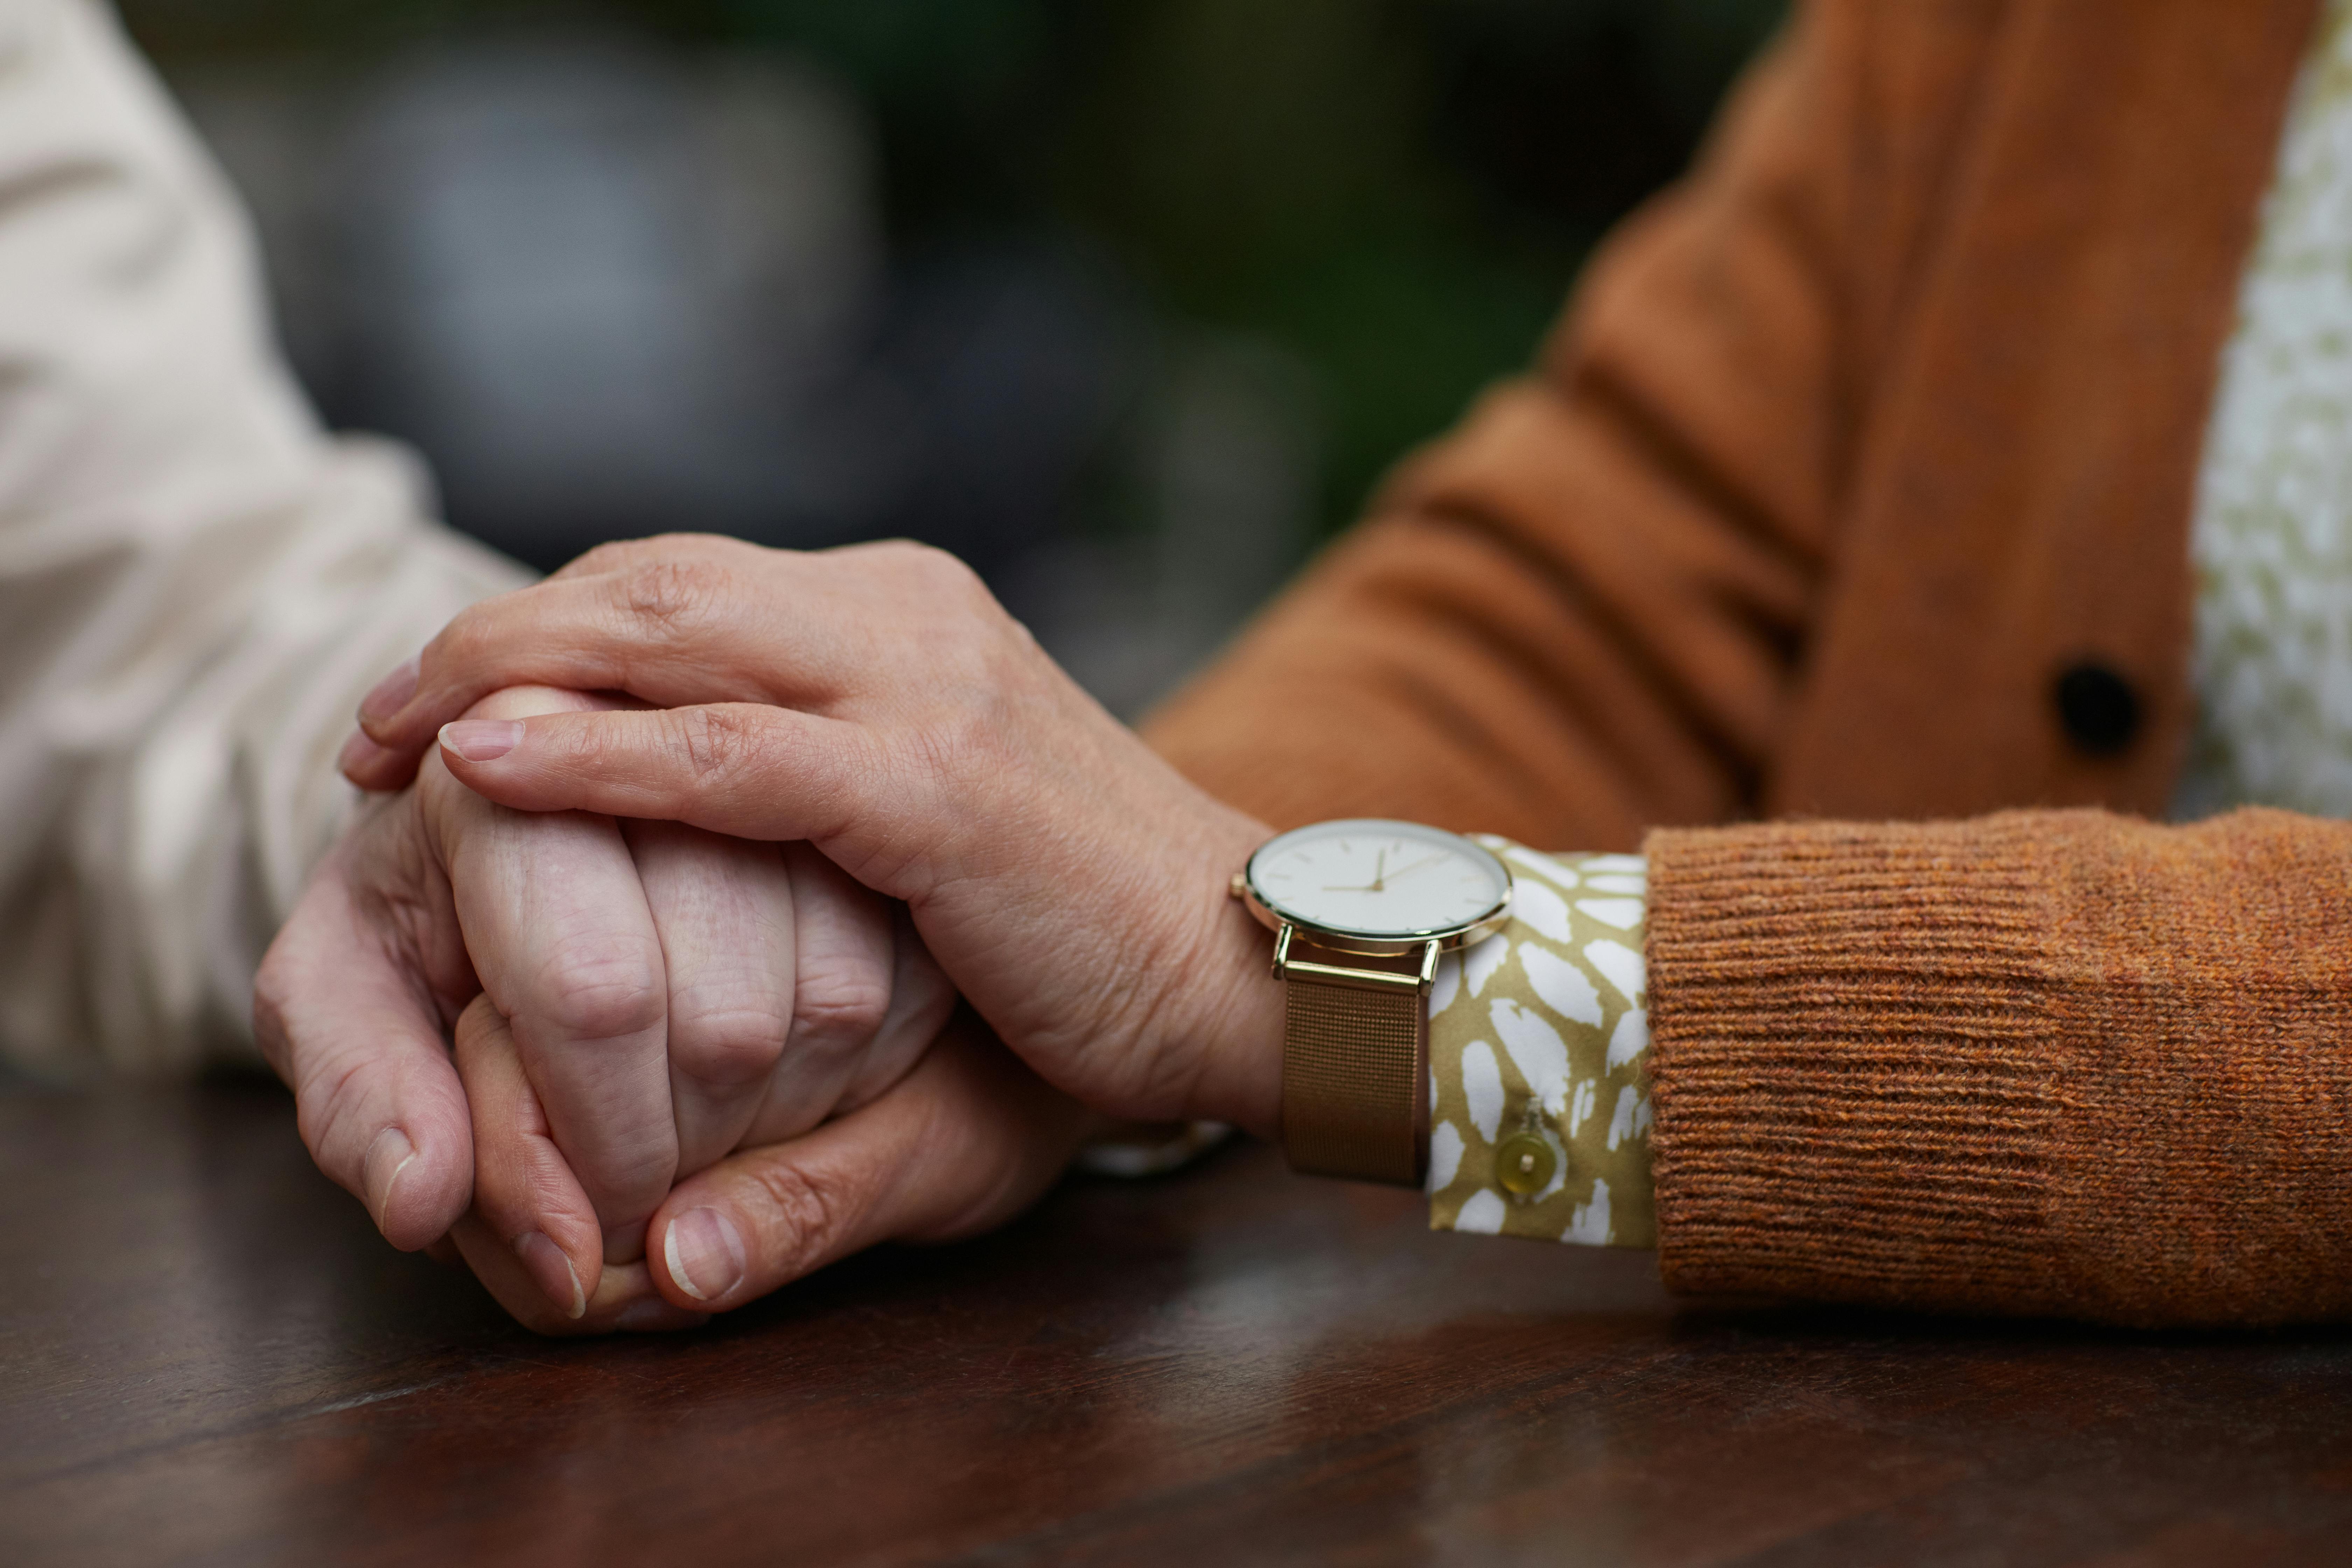 A couple holding hands | Source: Pexels